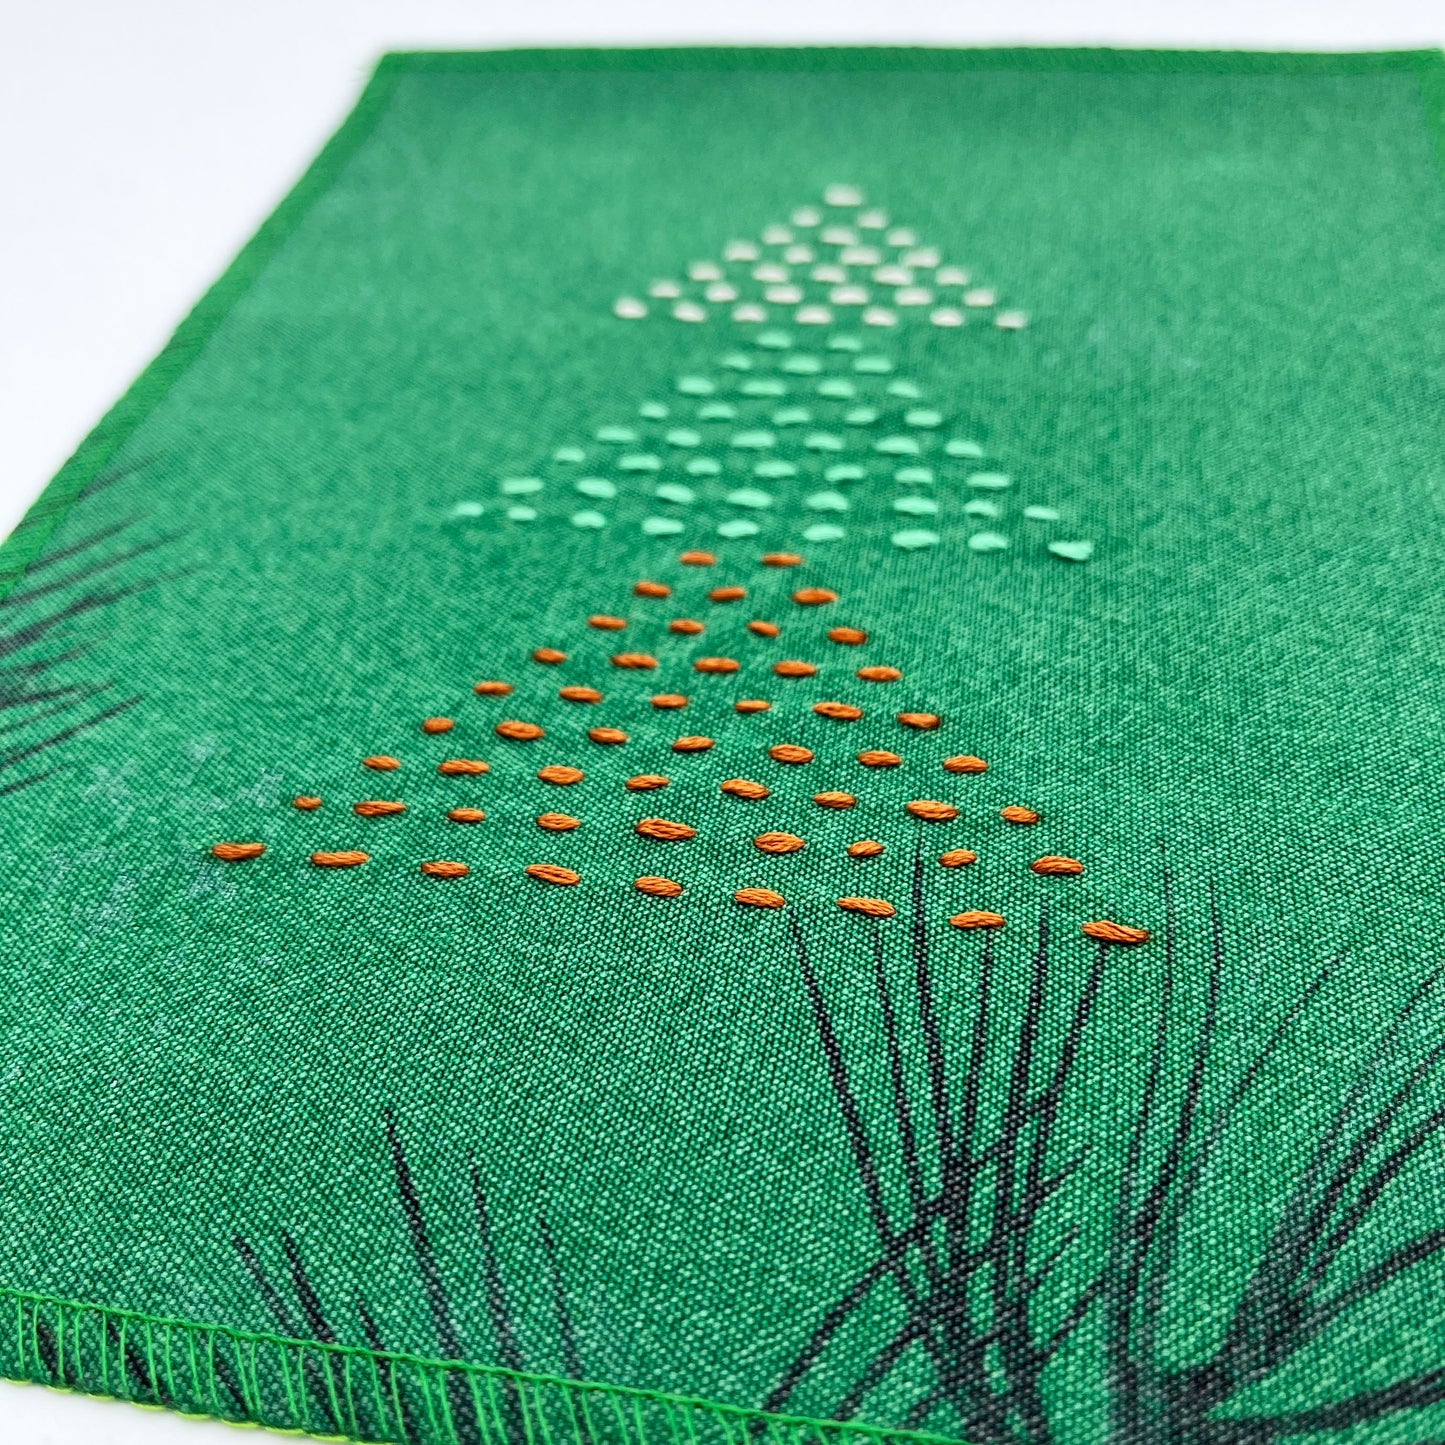 a close up view of a fabric wall hanging made from bright green fabric with pine branches printed on it, and stitched over with Christmas trees made from three triangles, each triangle made from running stitches in red green and peach